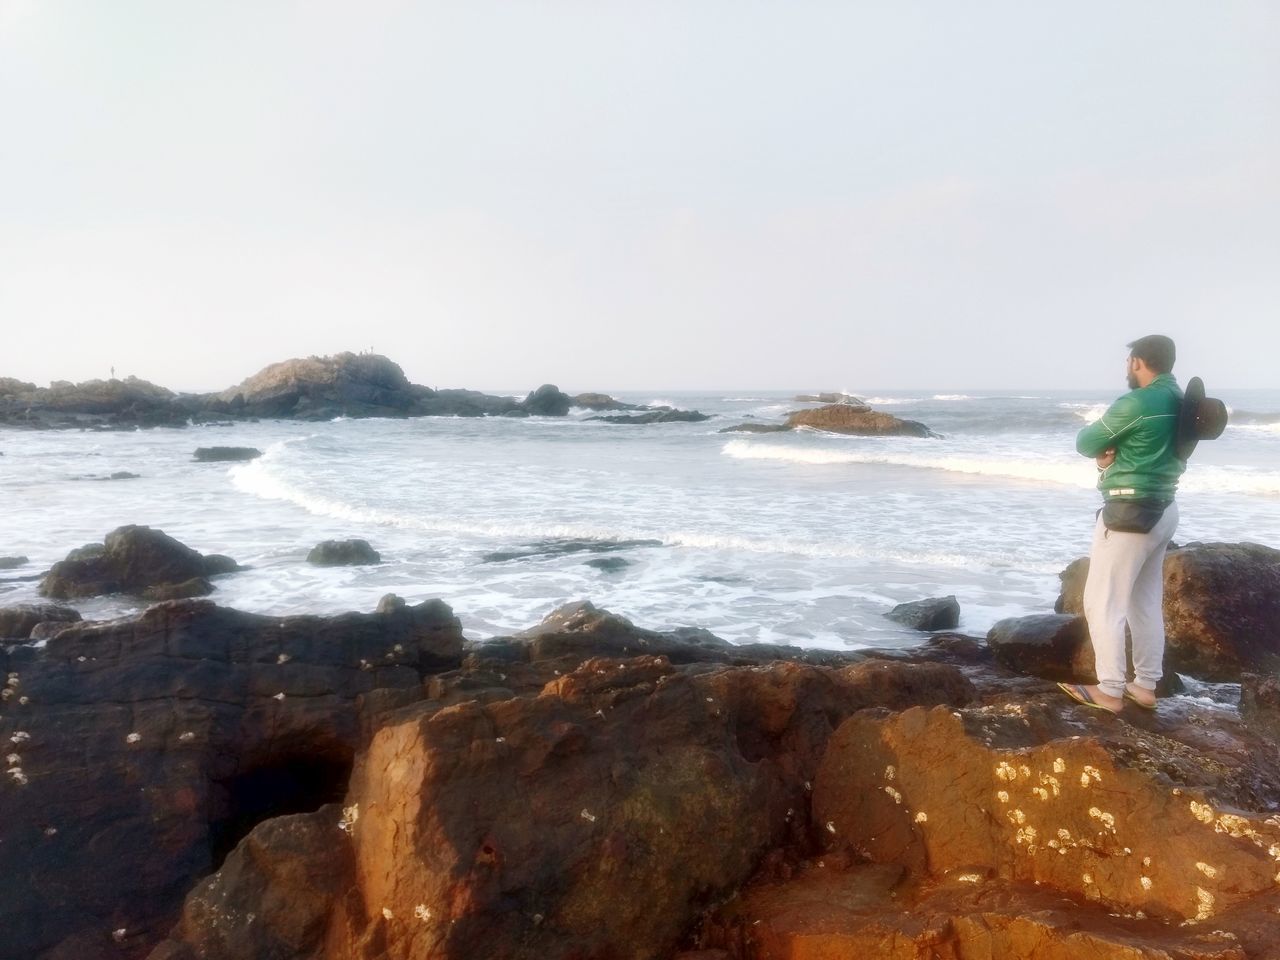 REAR VIEW OF MAN STANDING ON ROCK AT BEACH